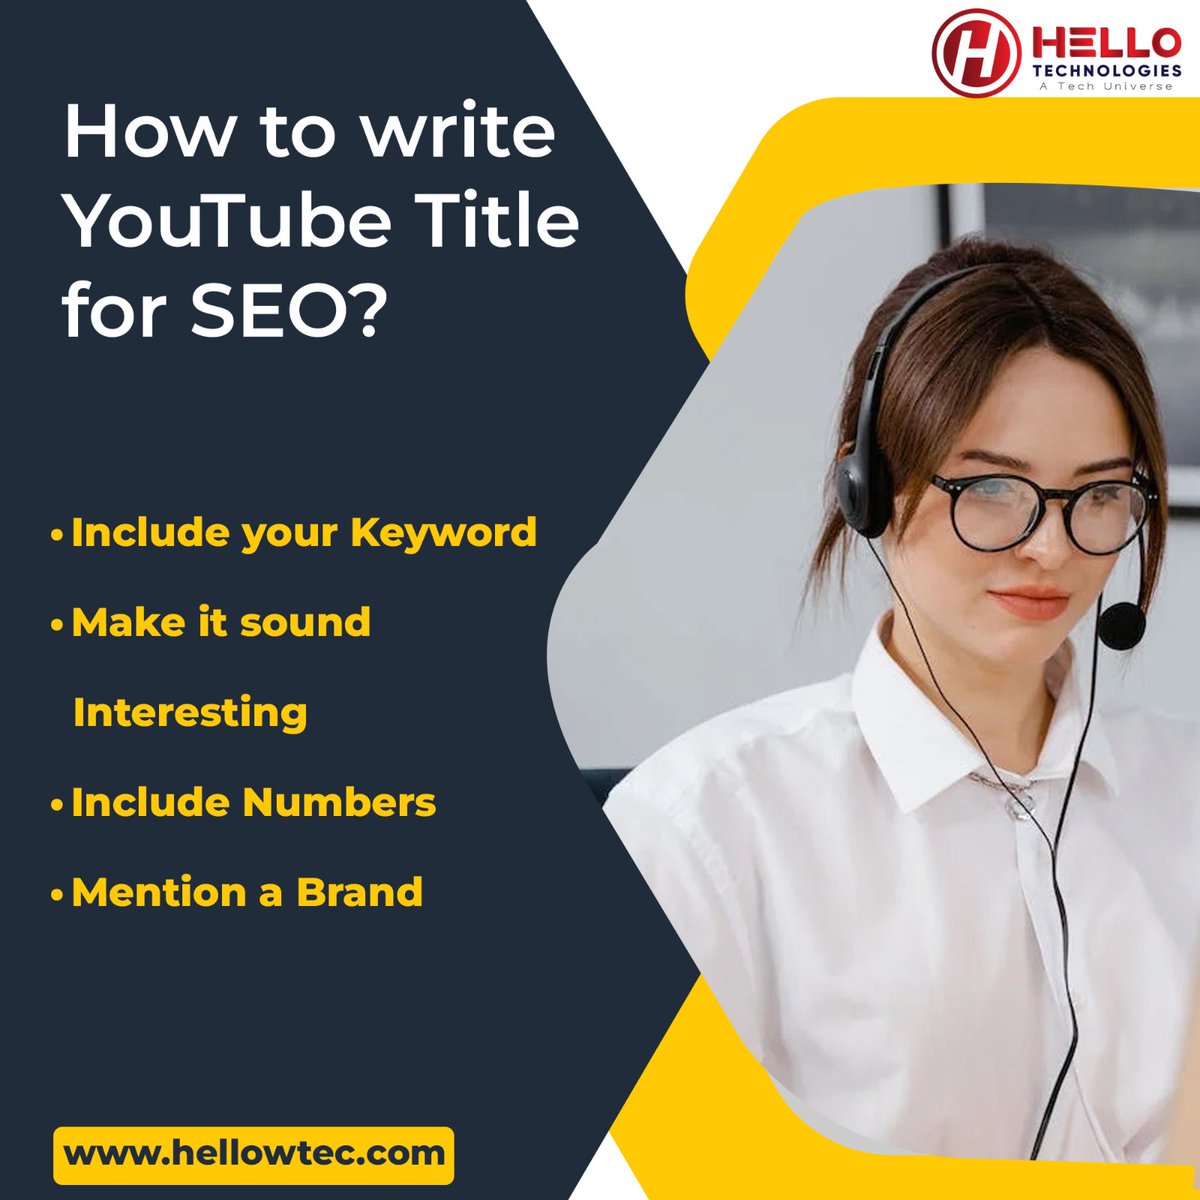 The success of a video is not solely determined by its quality or originality, but rather its discoverability.
.
.
#youtubetitle #youtube #youtubeseo #youtubeoptimization #seo #youtubetranding #youtubedescription #youtubeviral #yt #youtubetips #titles #titleoptimization